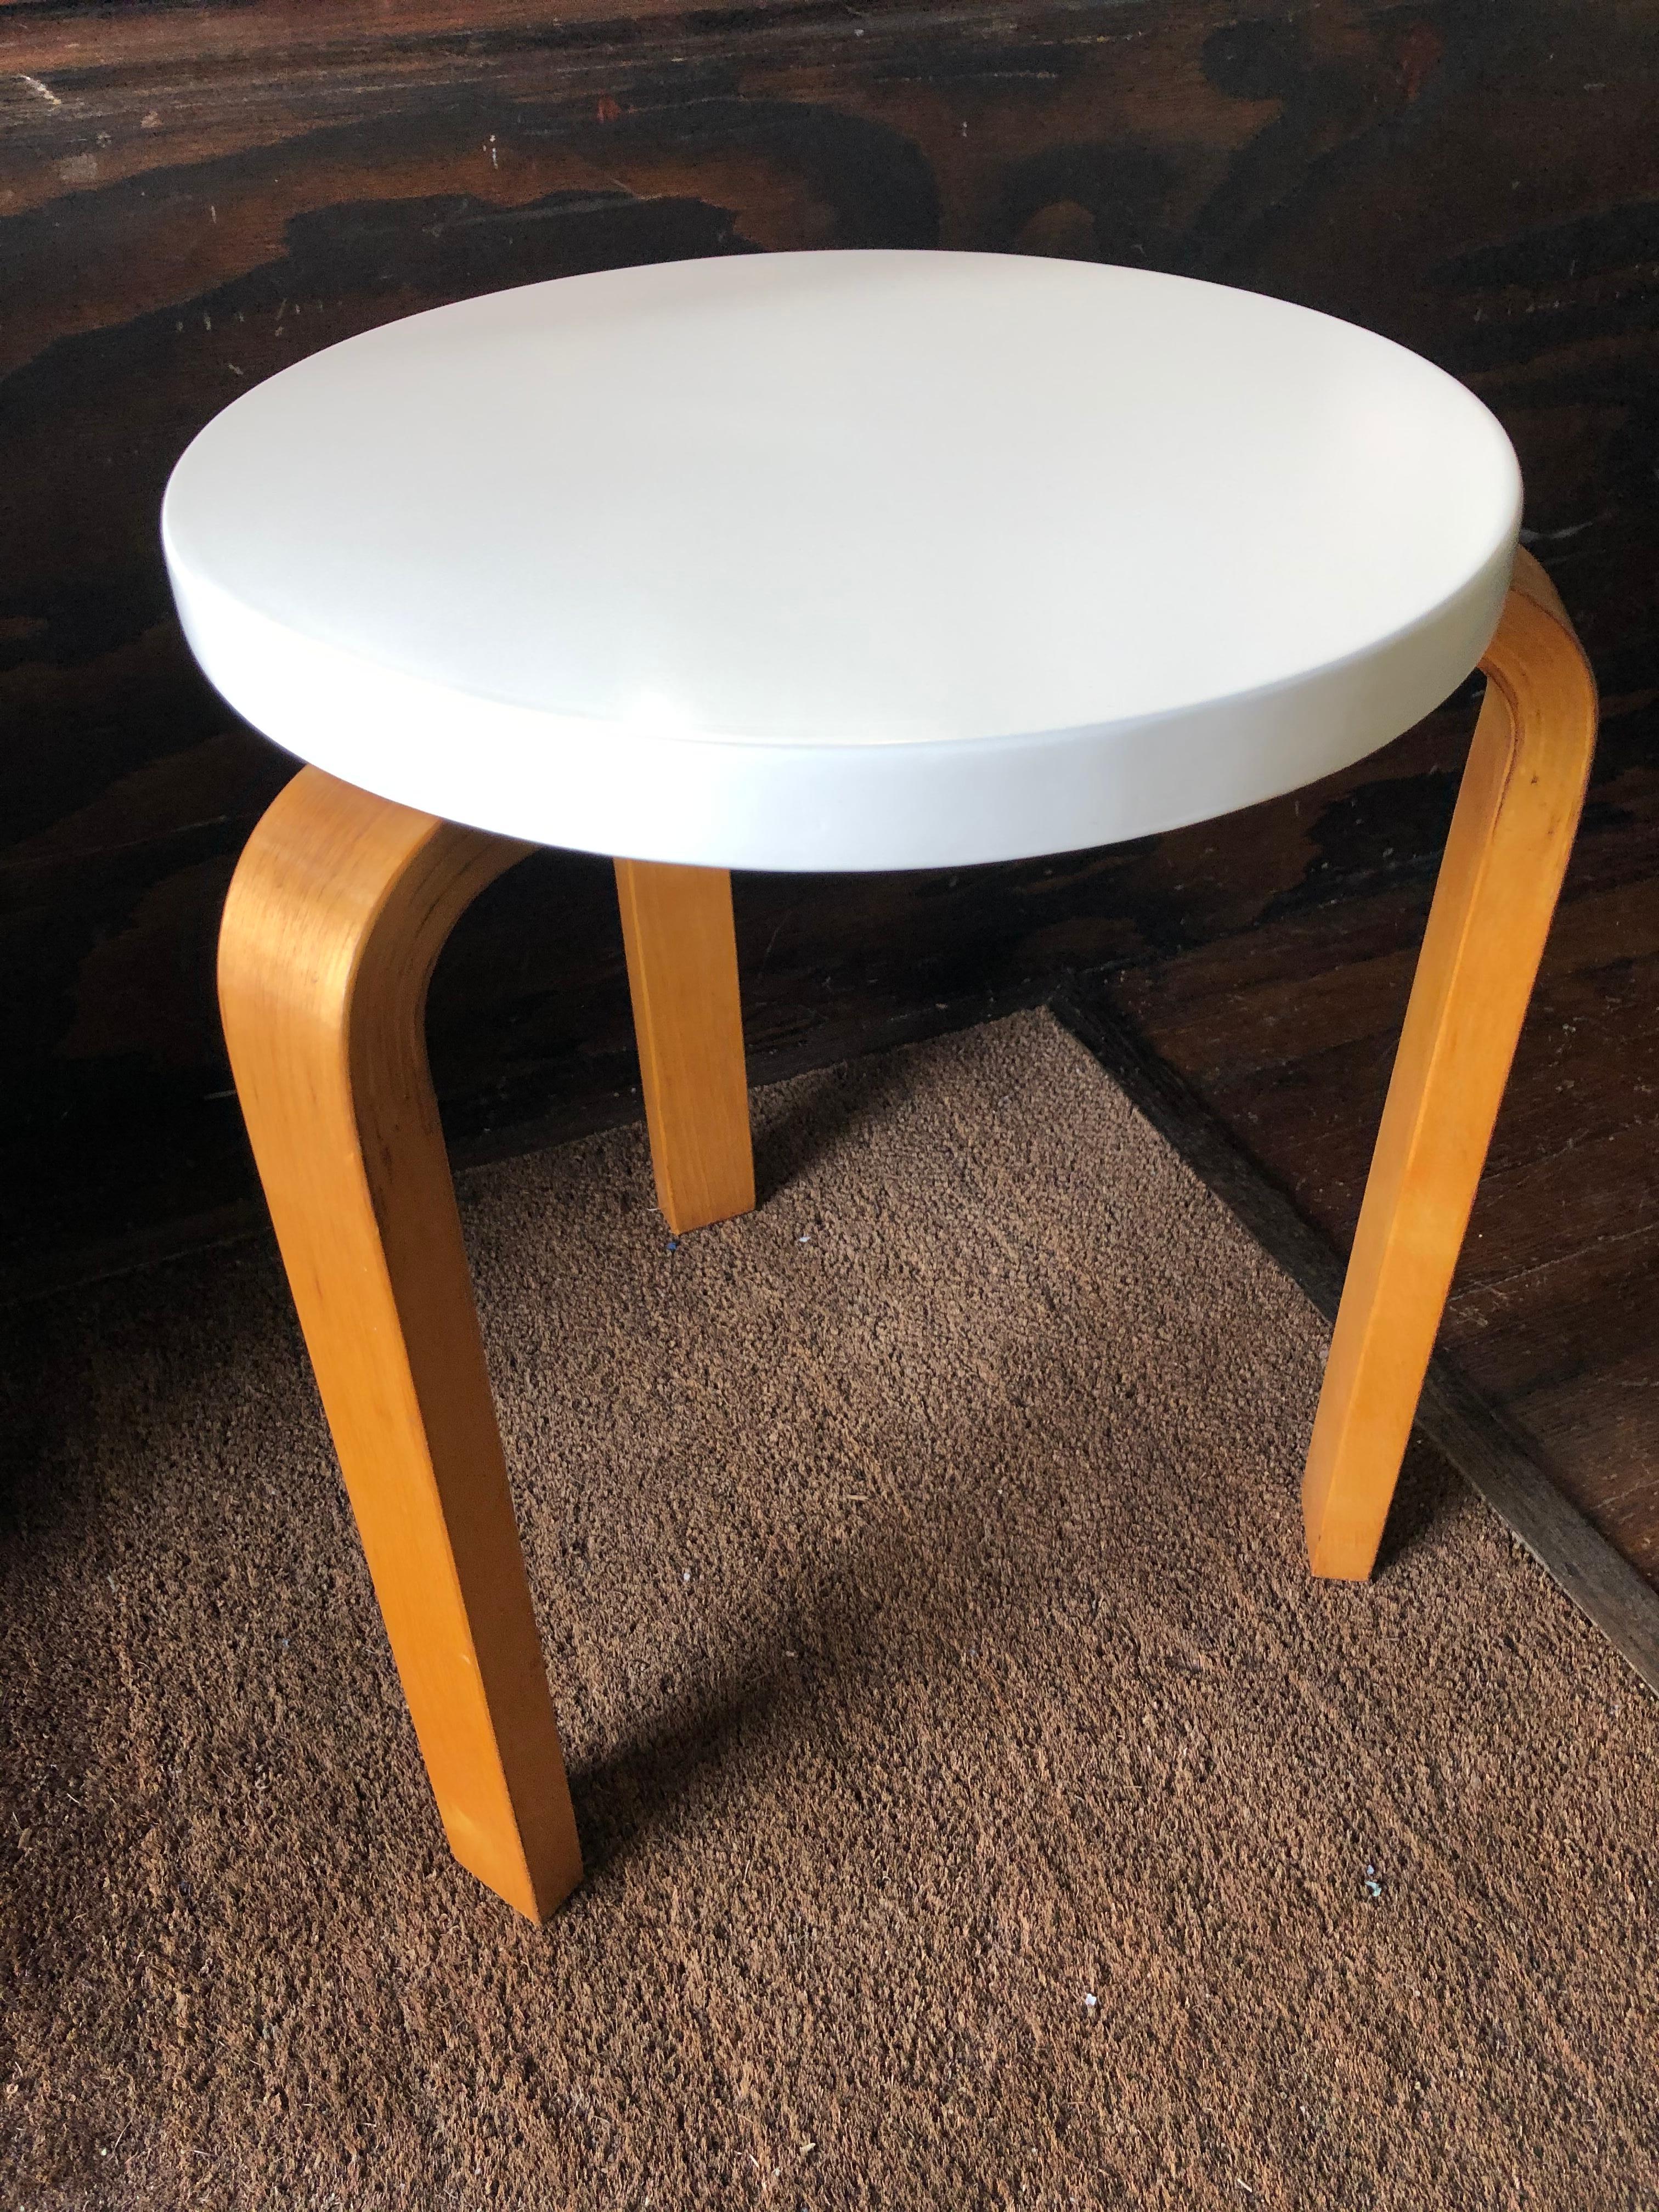 Alvar Aalto Early Finsven Stamped Stool / Small Table Lacquer Top 3